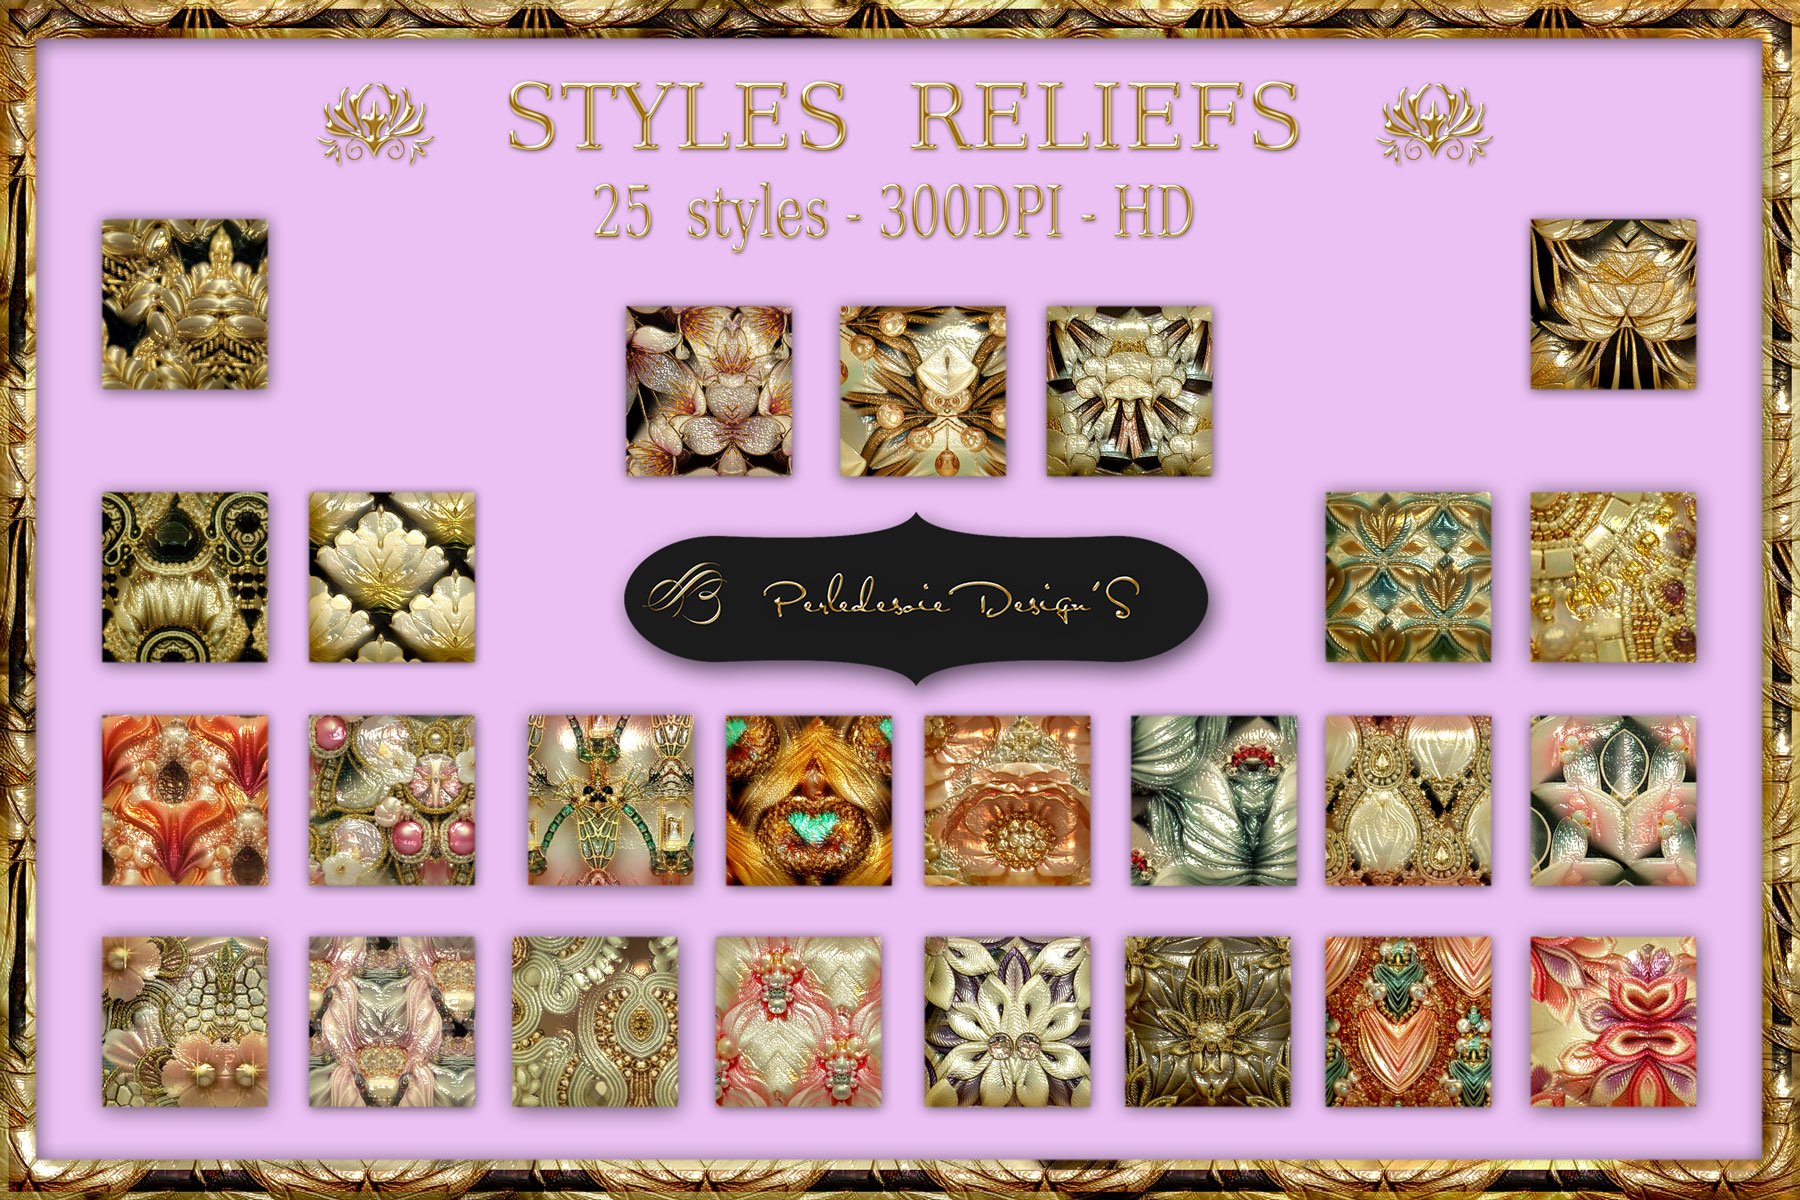 Styles Reliefcover image.